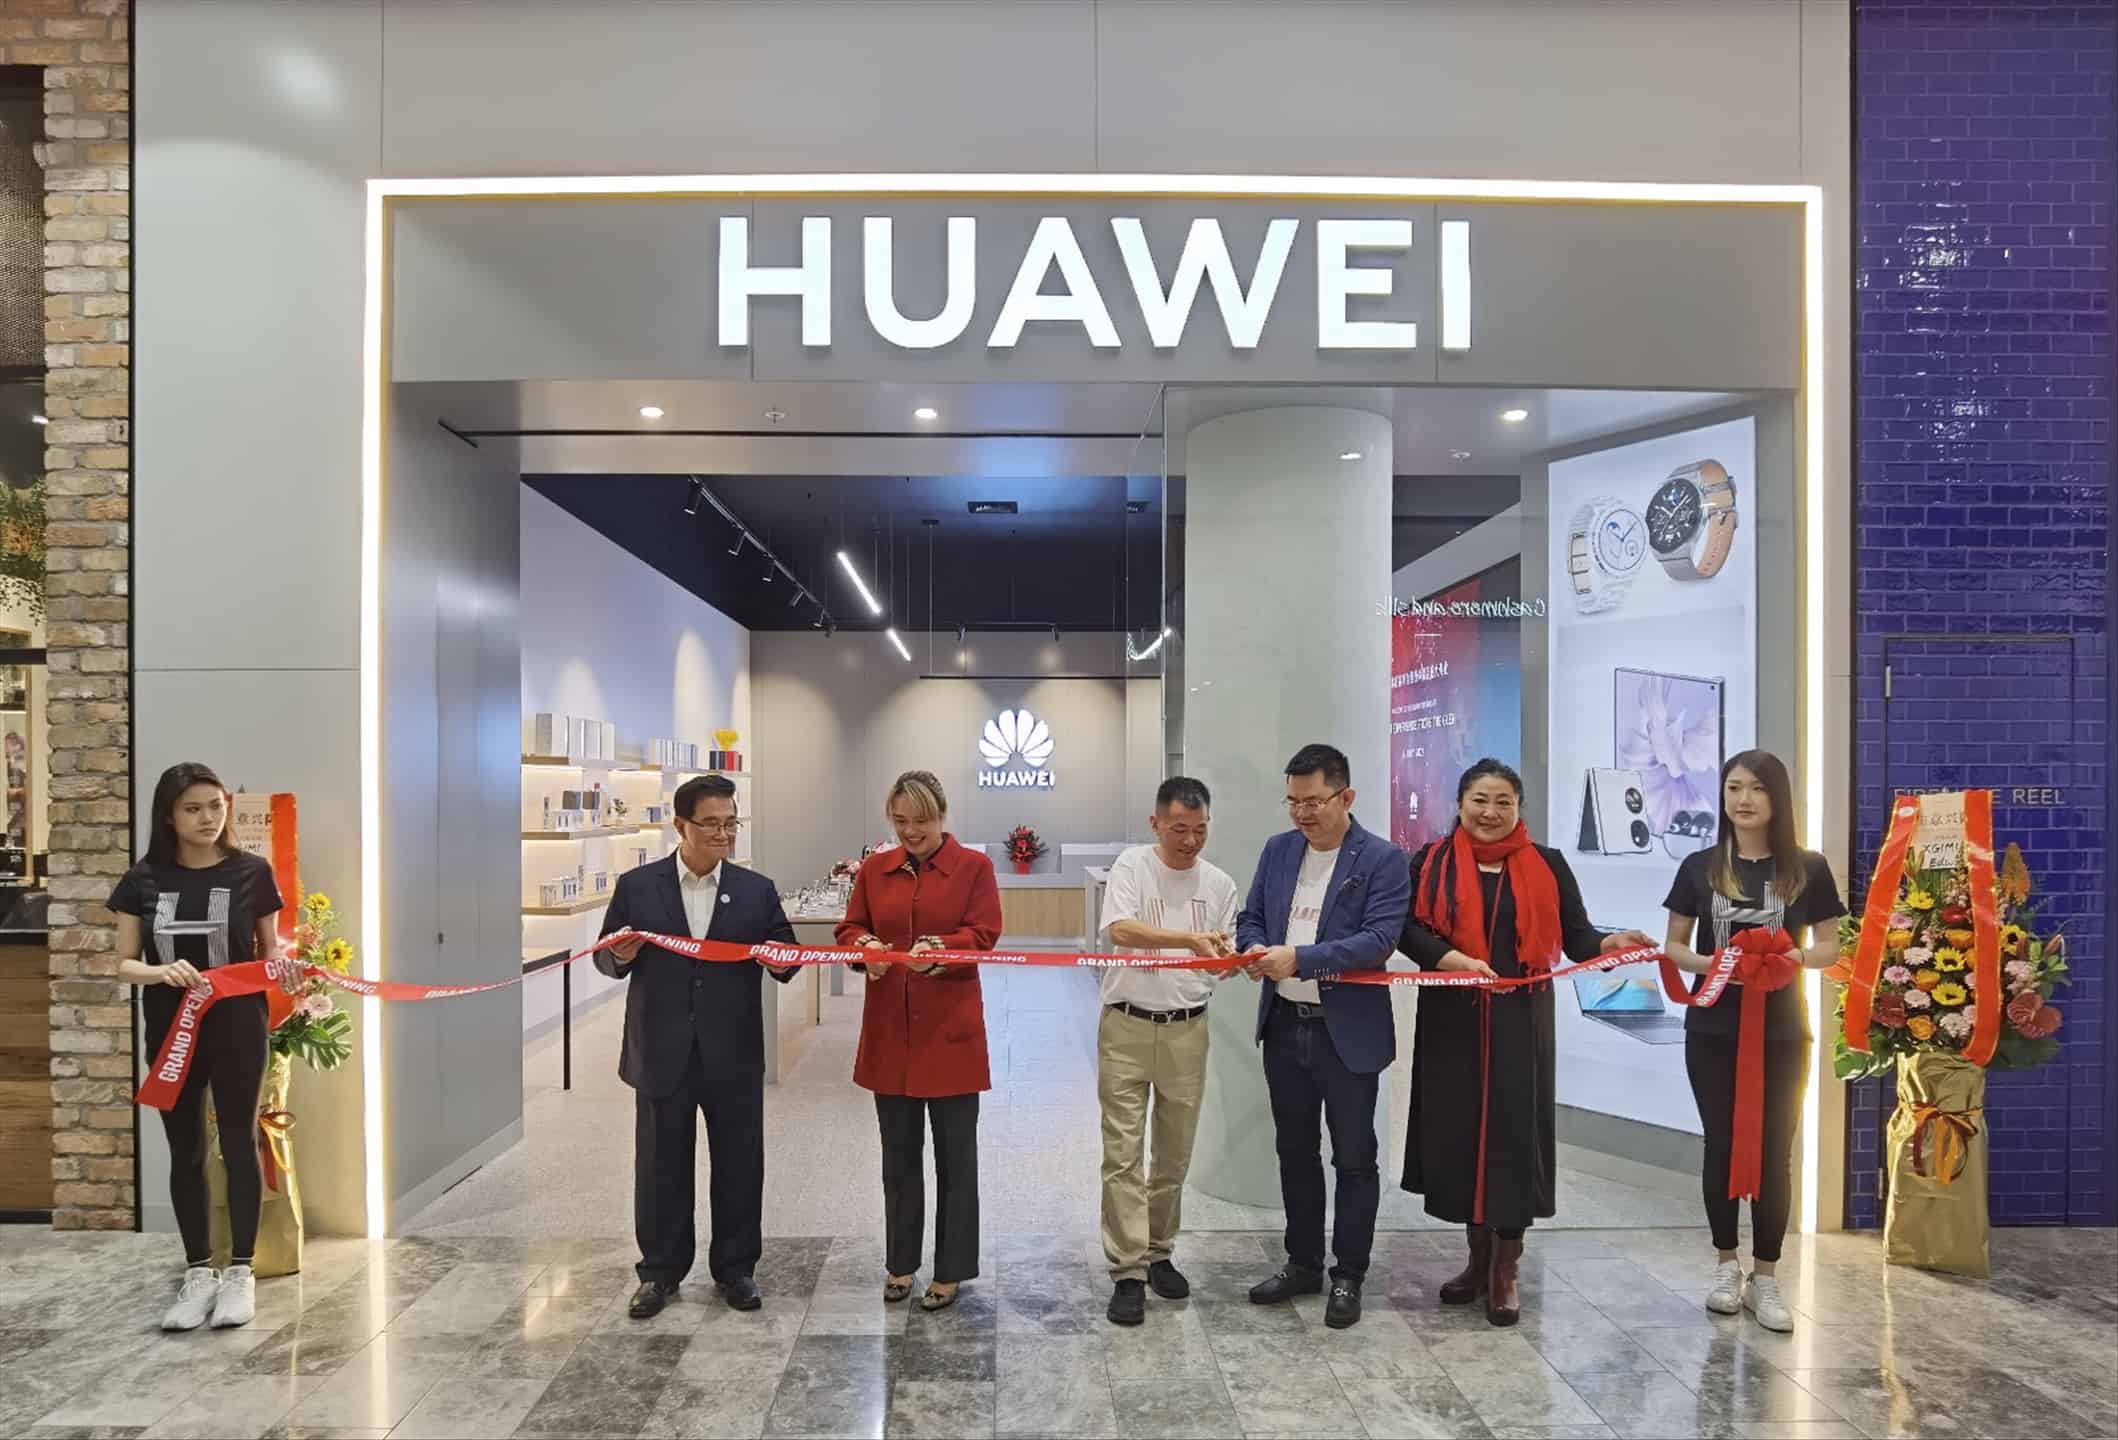 Huawei store in Melbourne just opened up for the first time